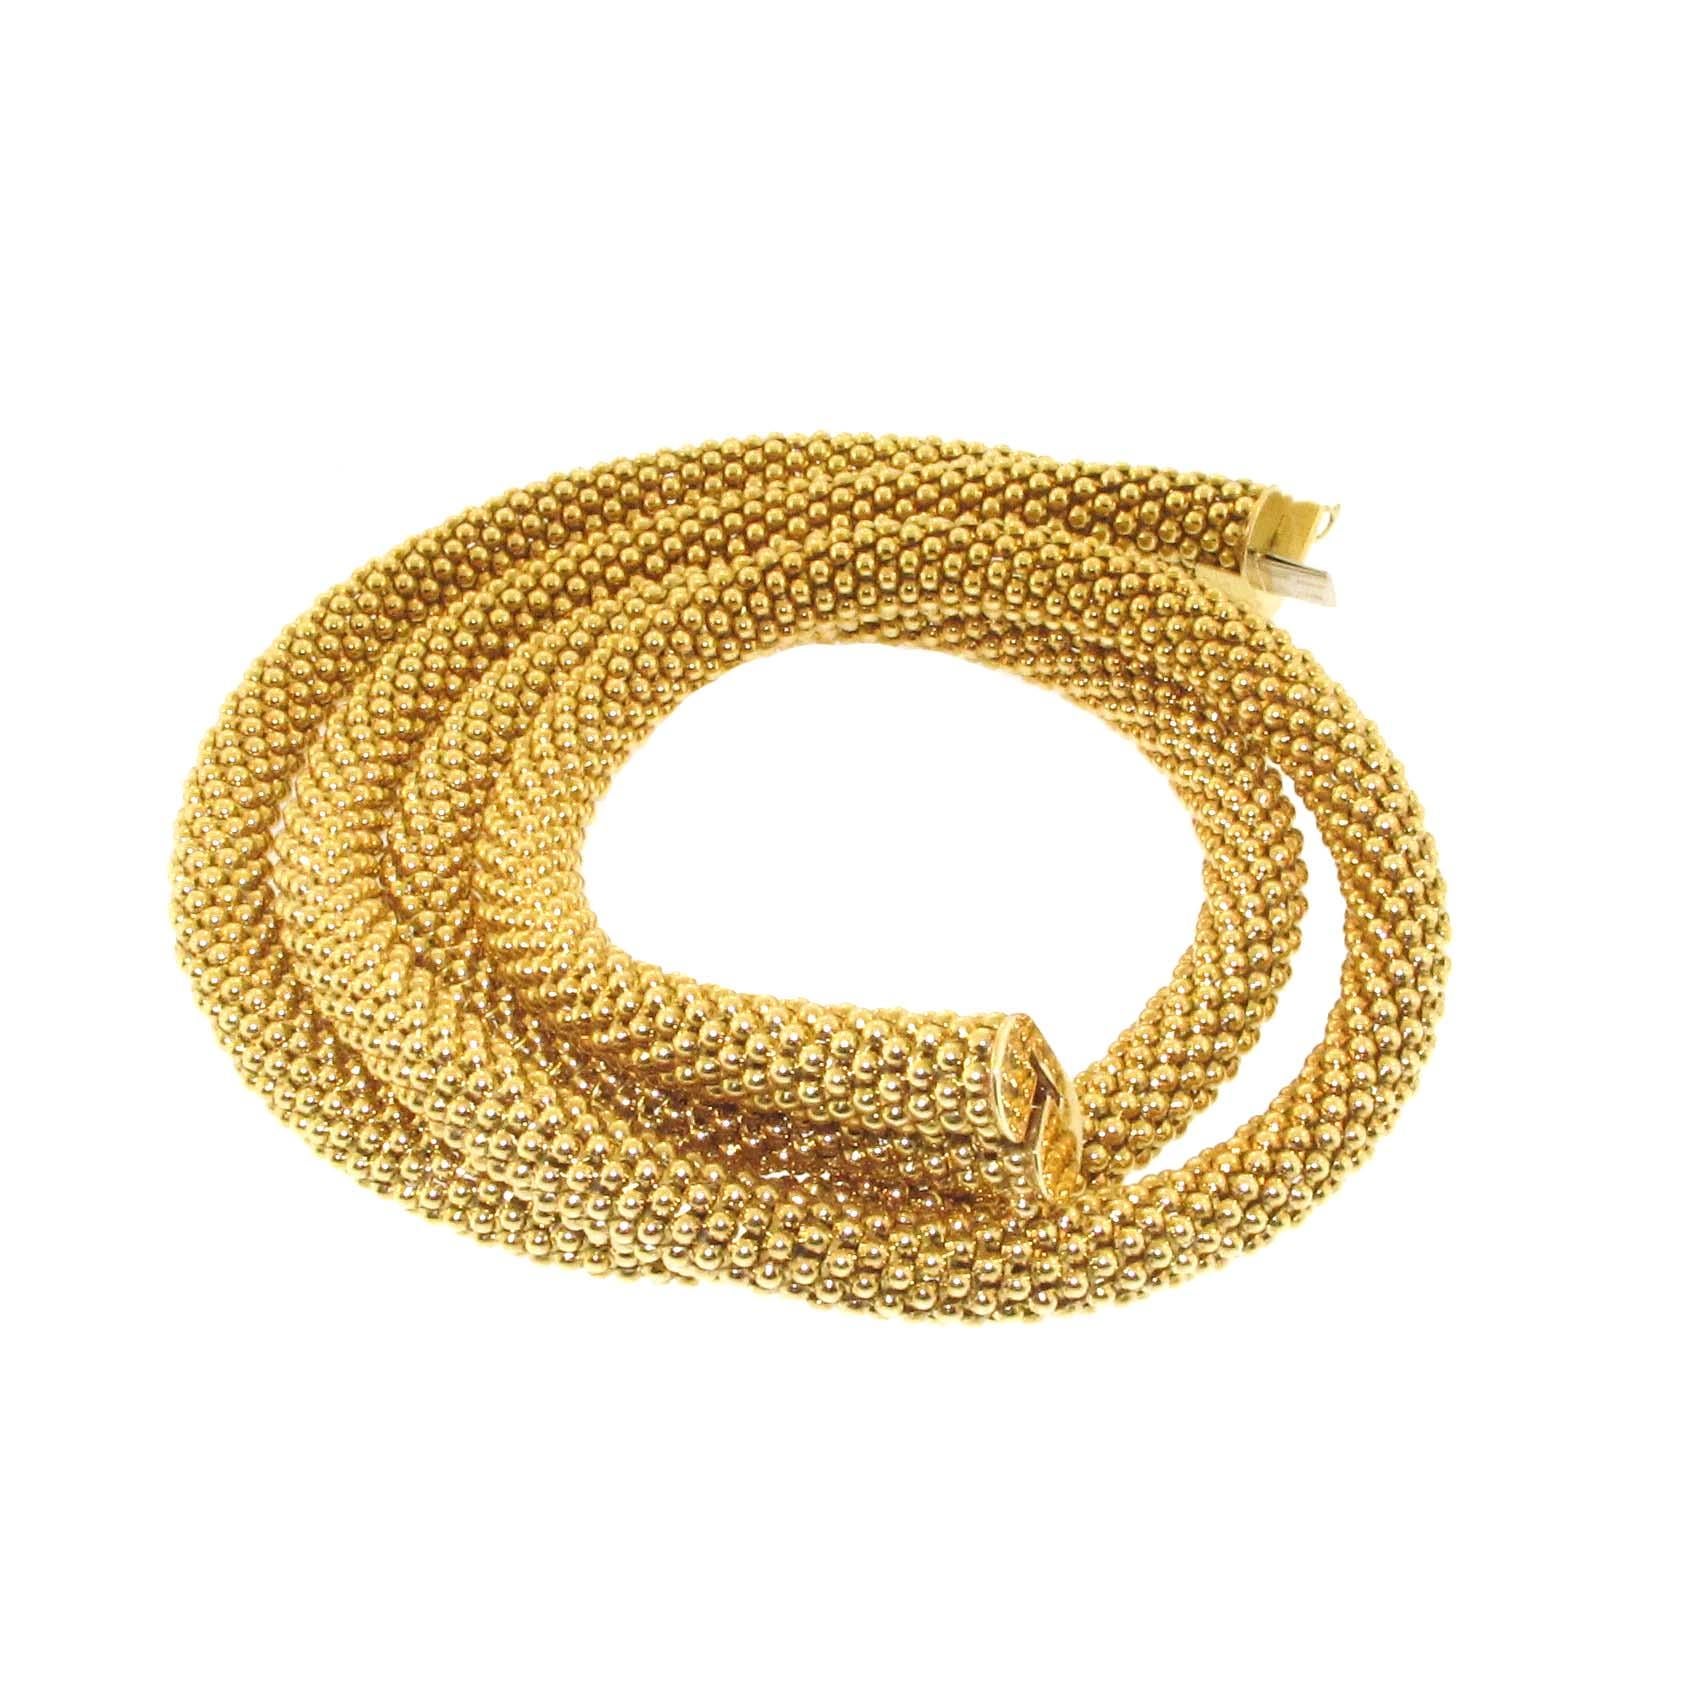 This necklace screams Tiffany! They are one of the finest manufacturers in the world when it comes to 18kt yellow gold necklaces. This necklace is a double wrap which clasps behind the neck together in the back. It has a gorgeous beaded texture and